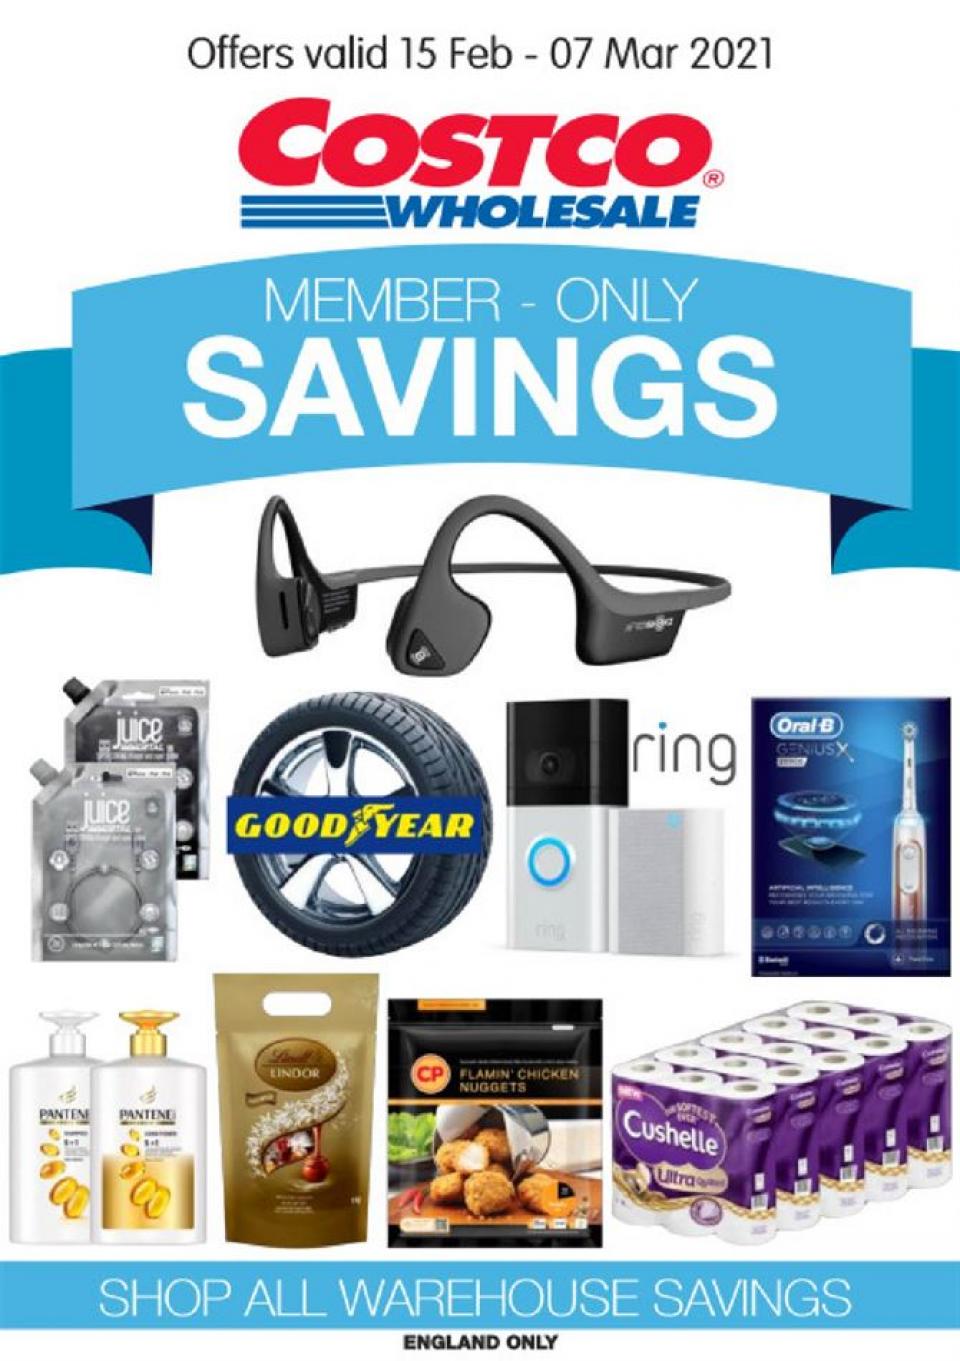 Costco Offers Member-Only Savings 15 February 2021